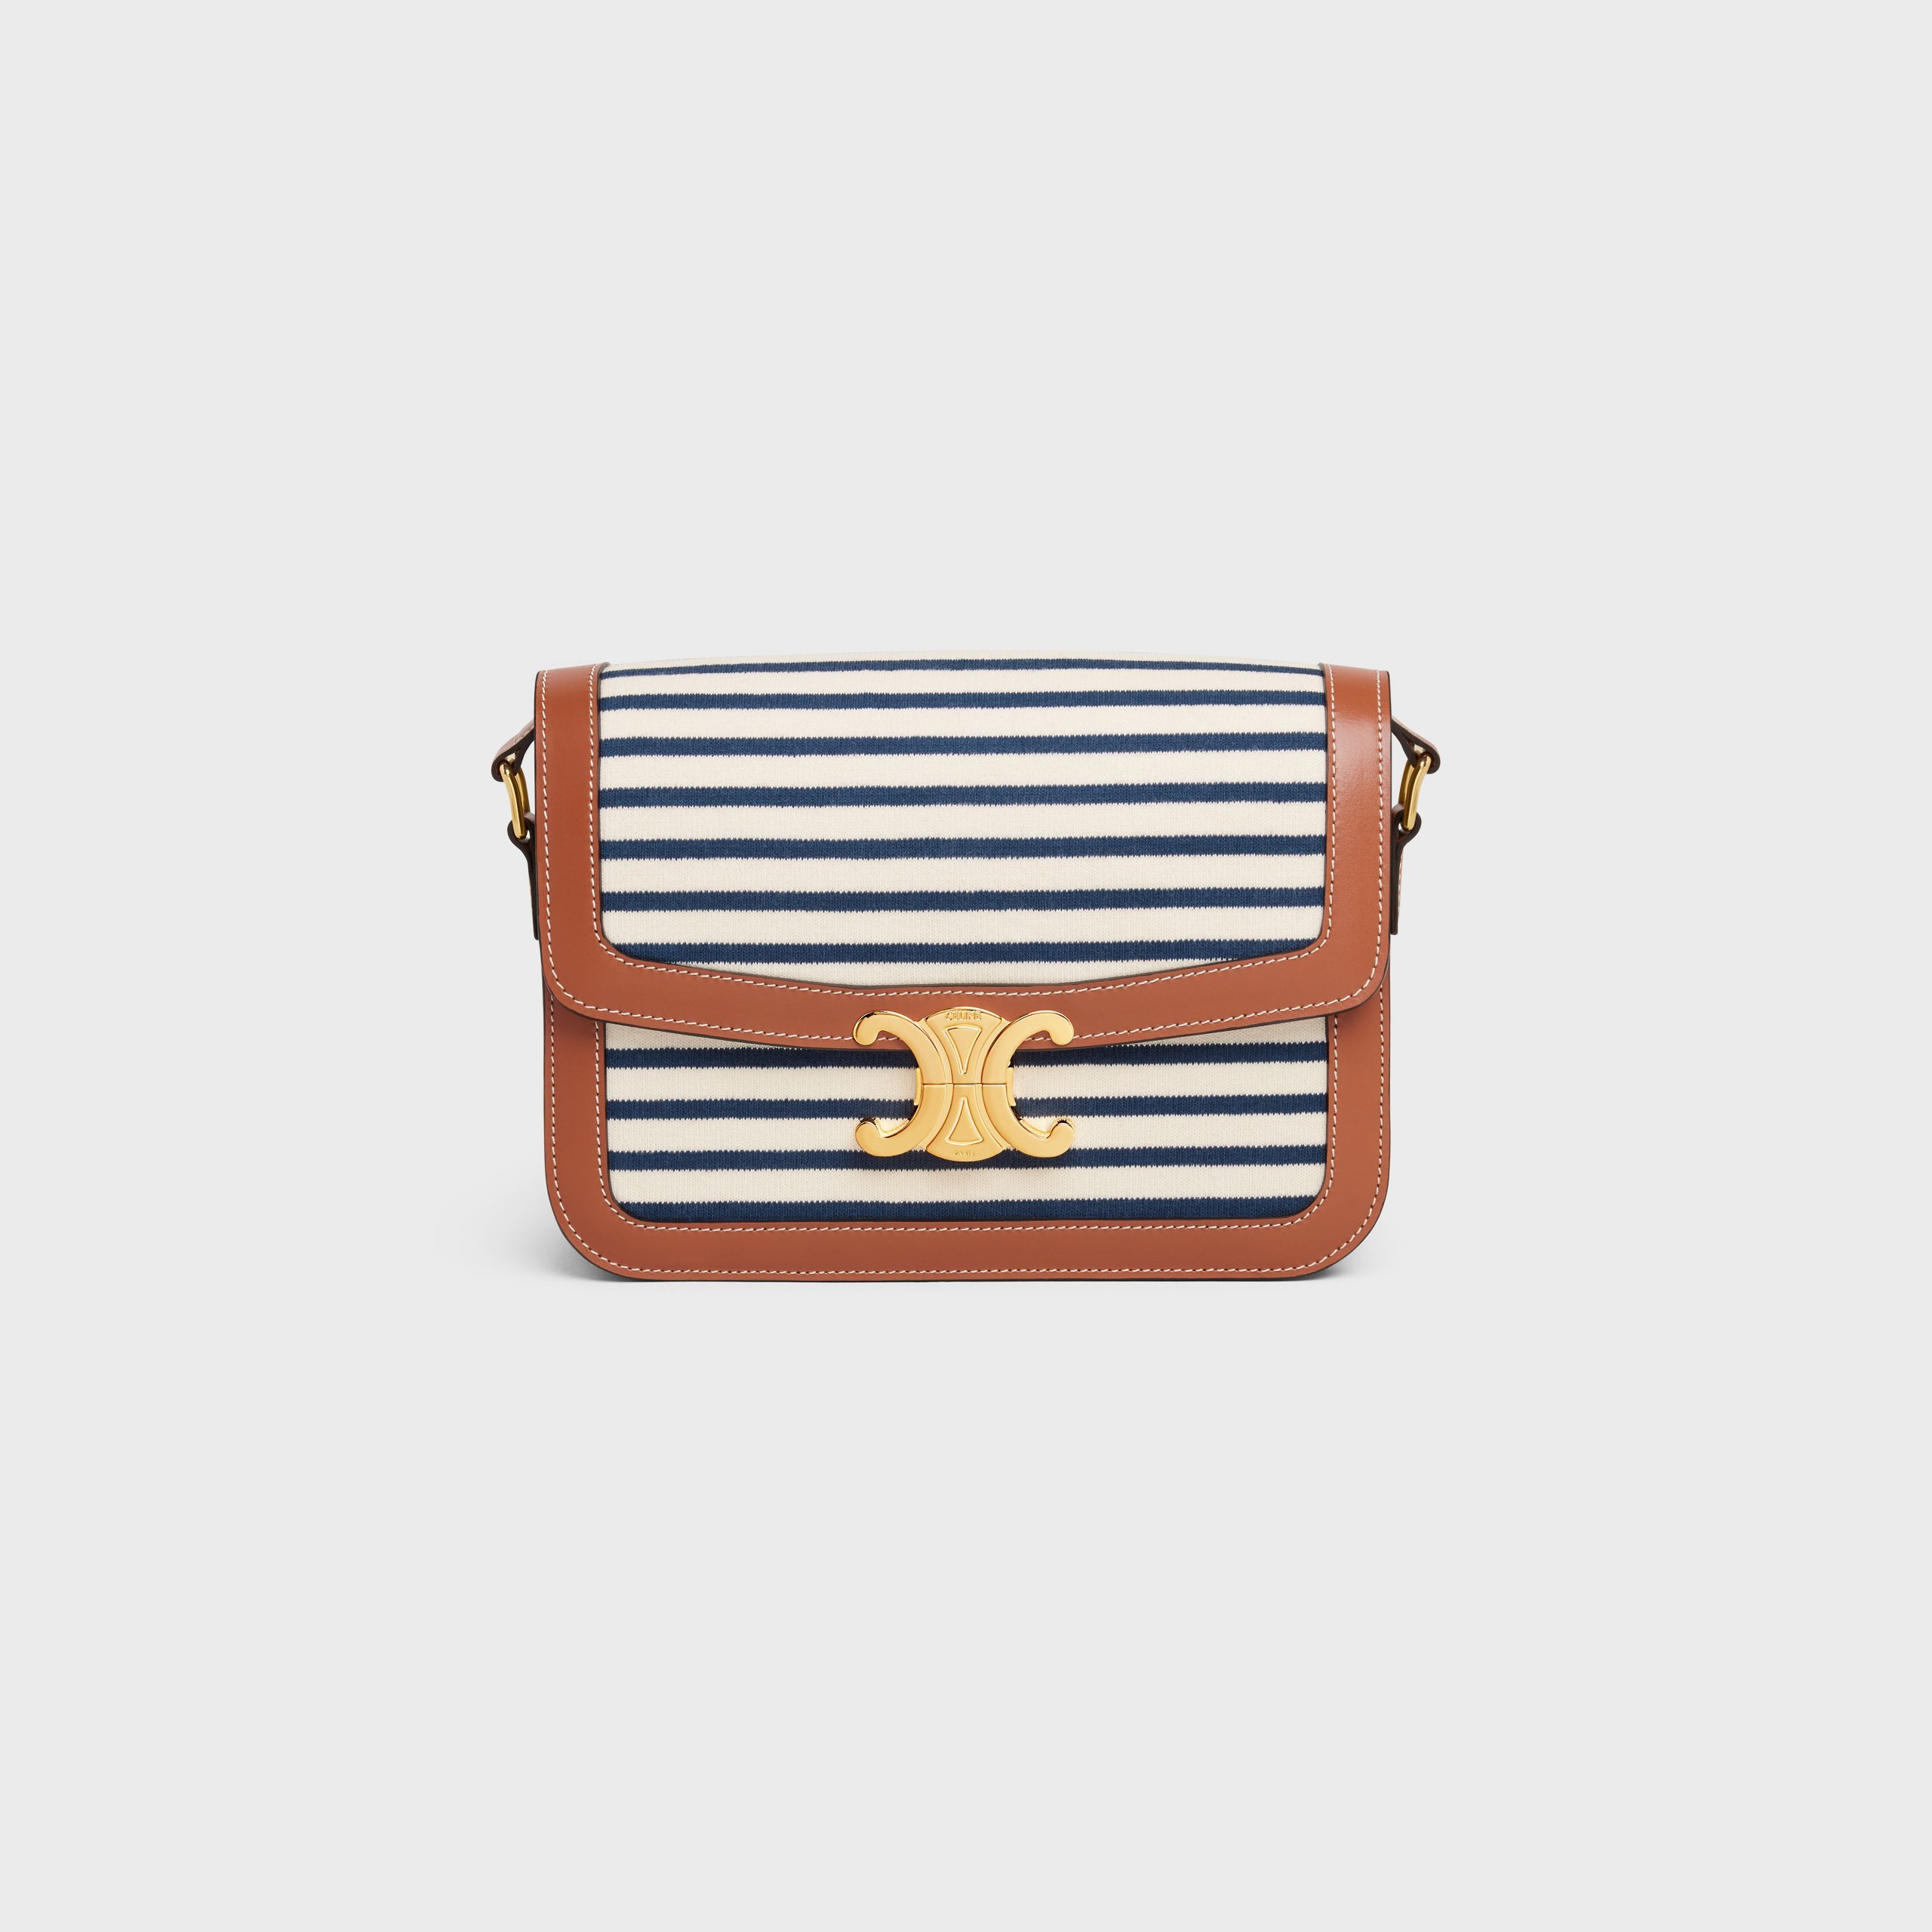 Celine Medium Triomphe Bag In Striped Textile And Calfskin – Navy / Tan – 191242DKU.07AT